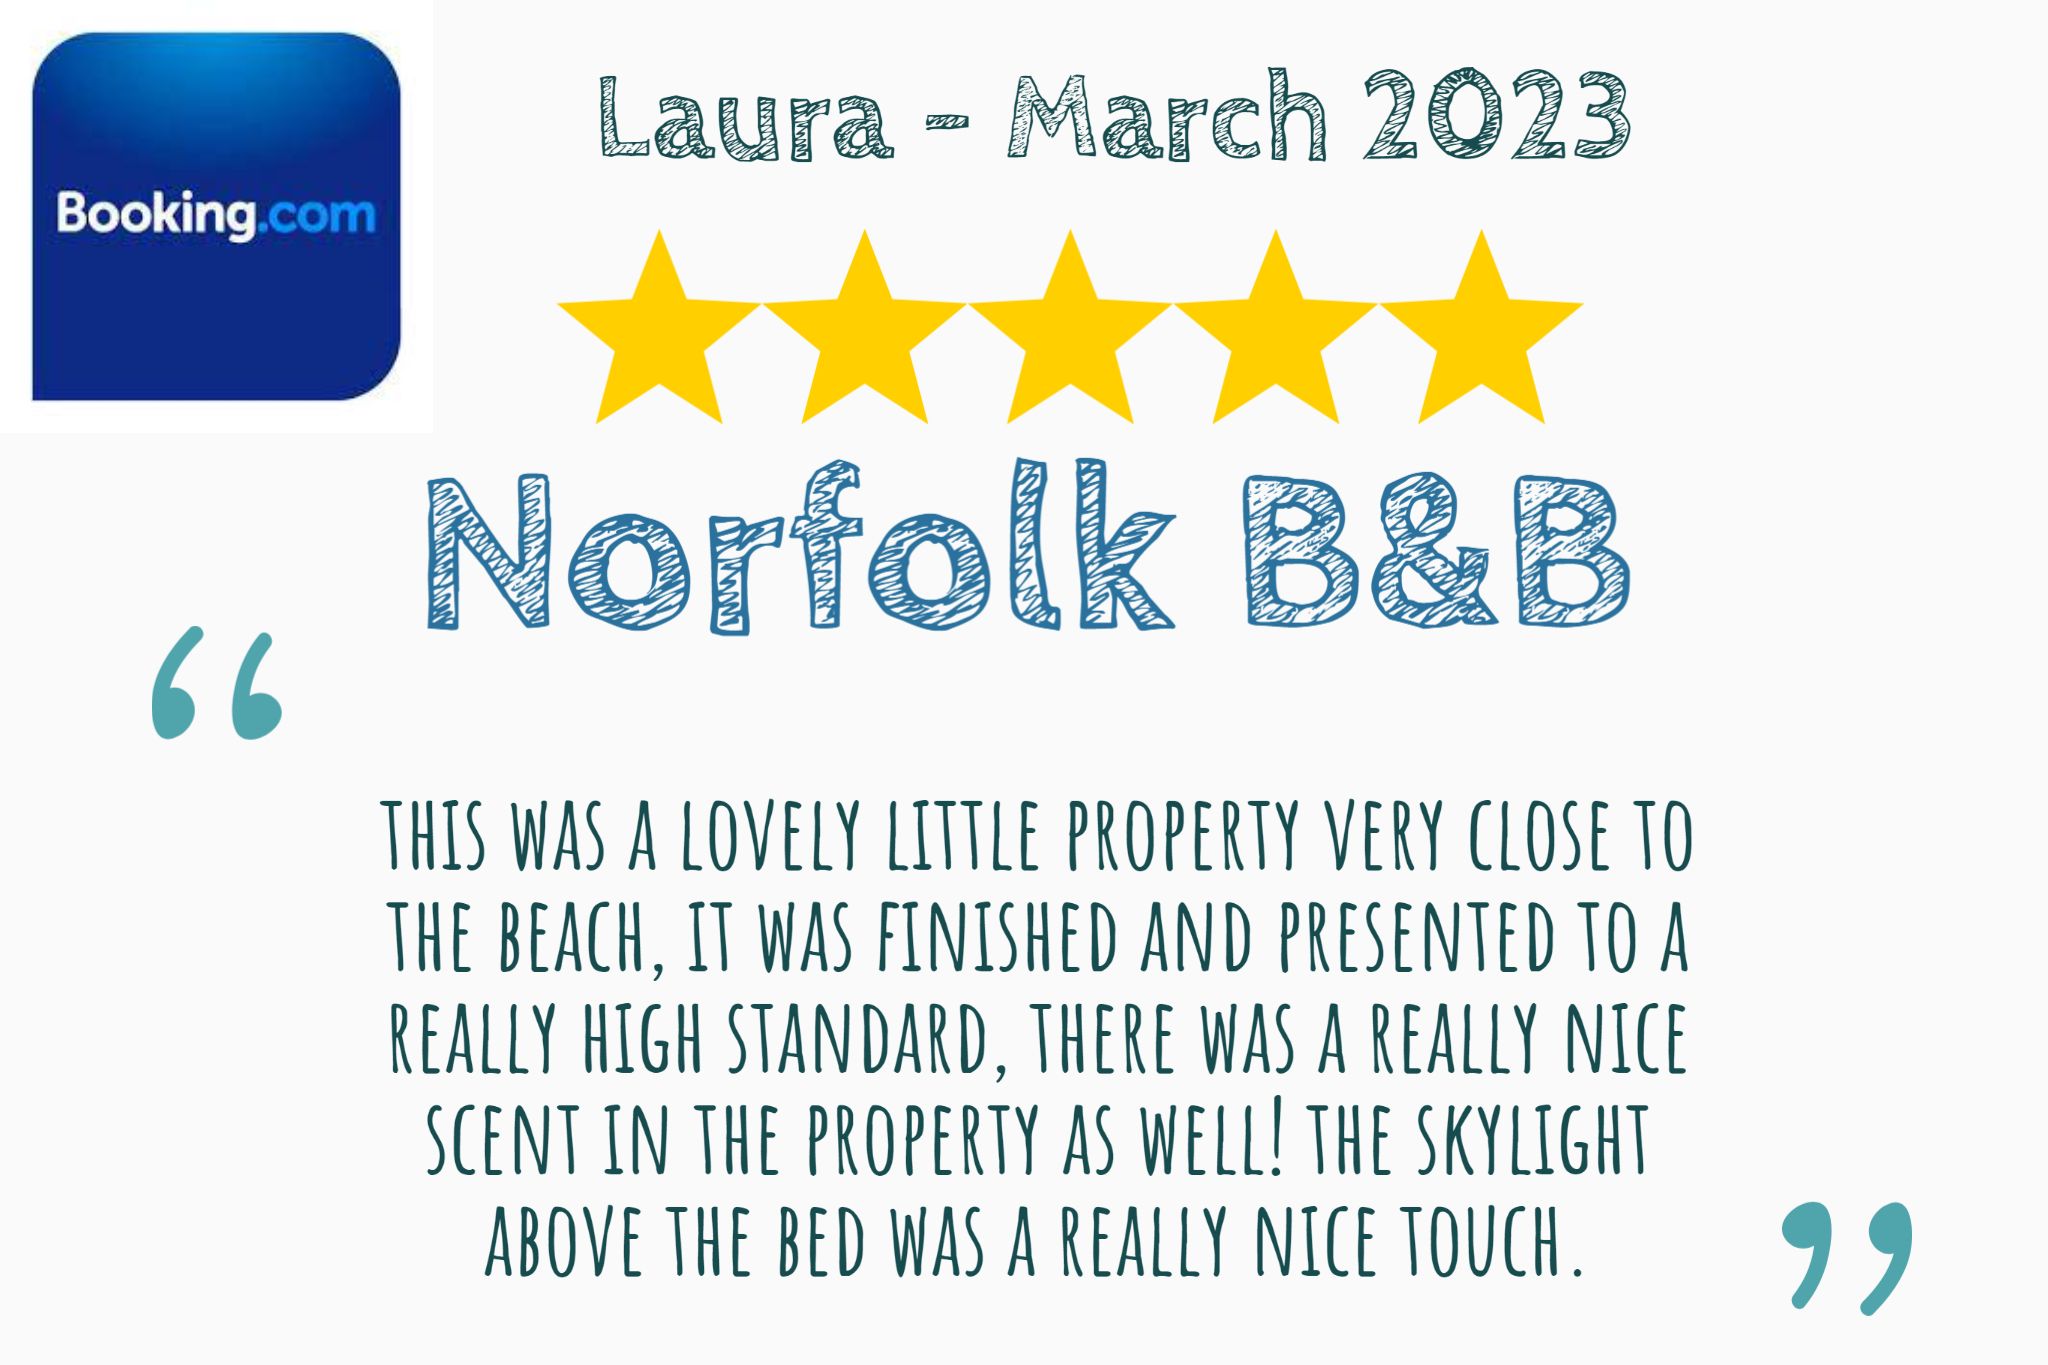 Laura's Booking.com review of our Norfolk B&B Hotel